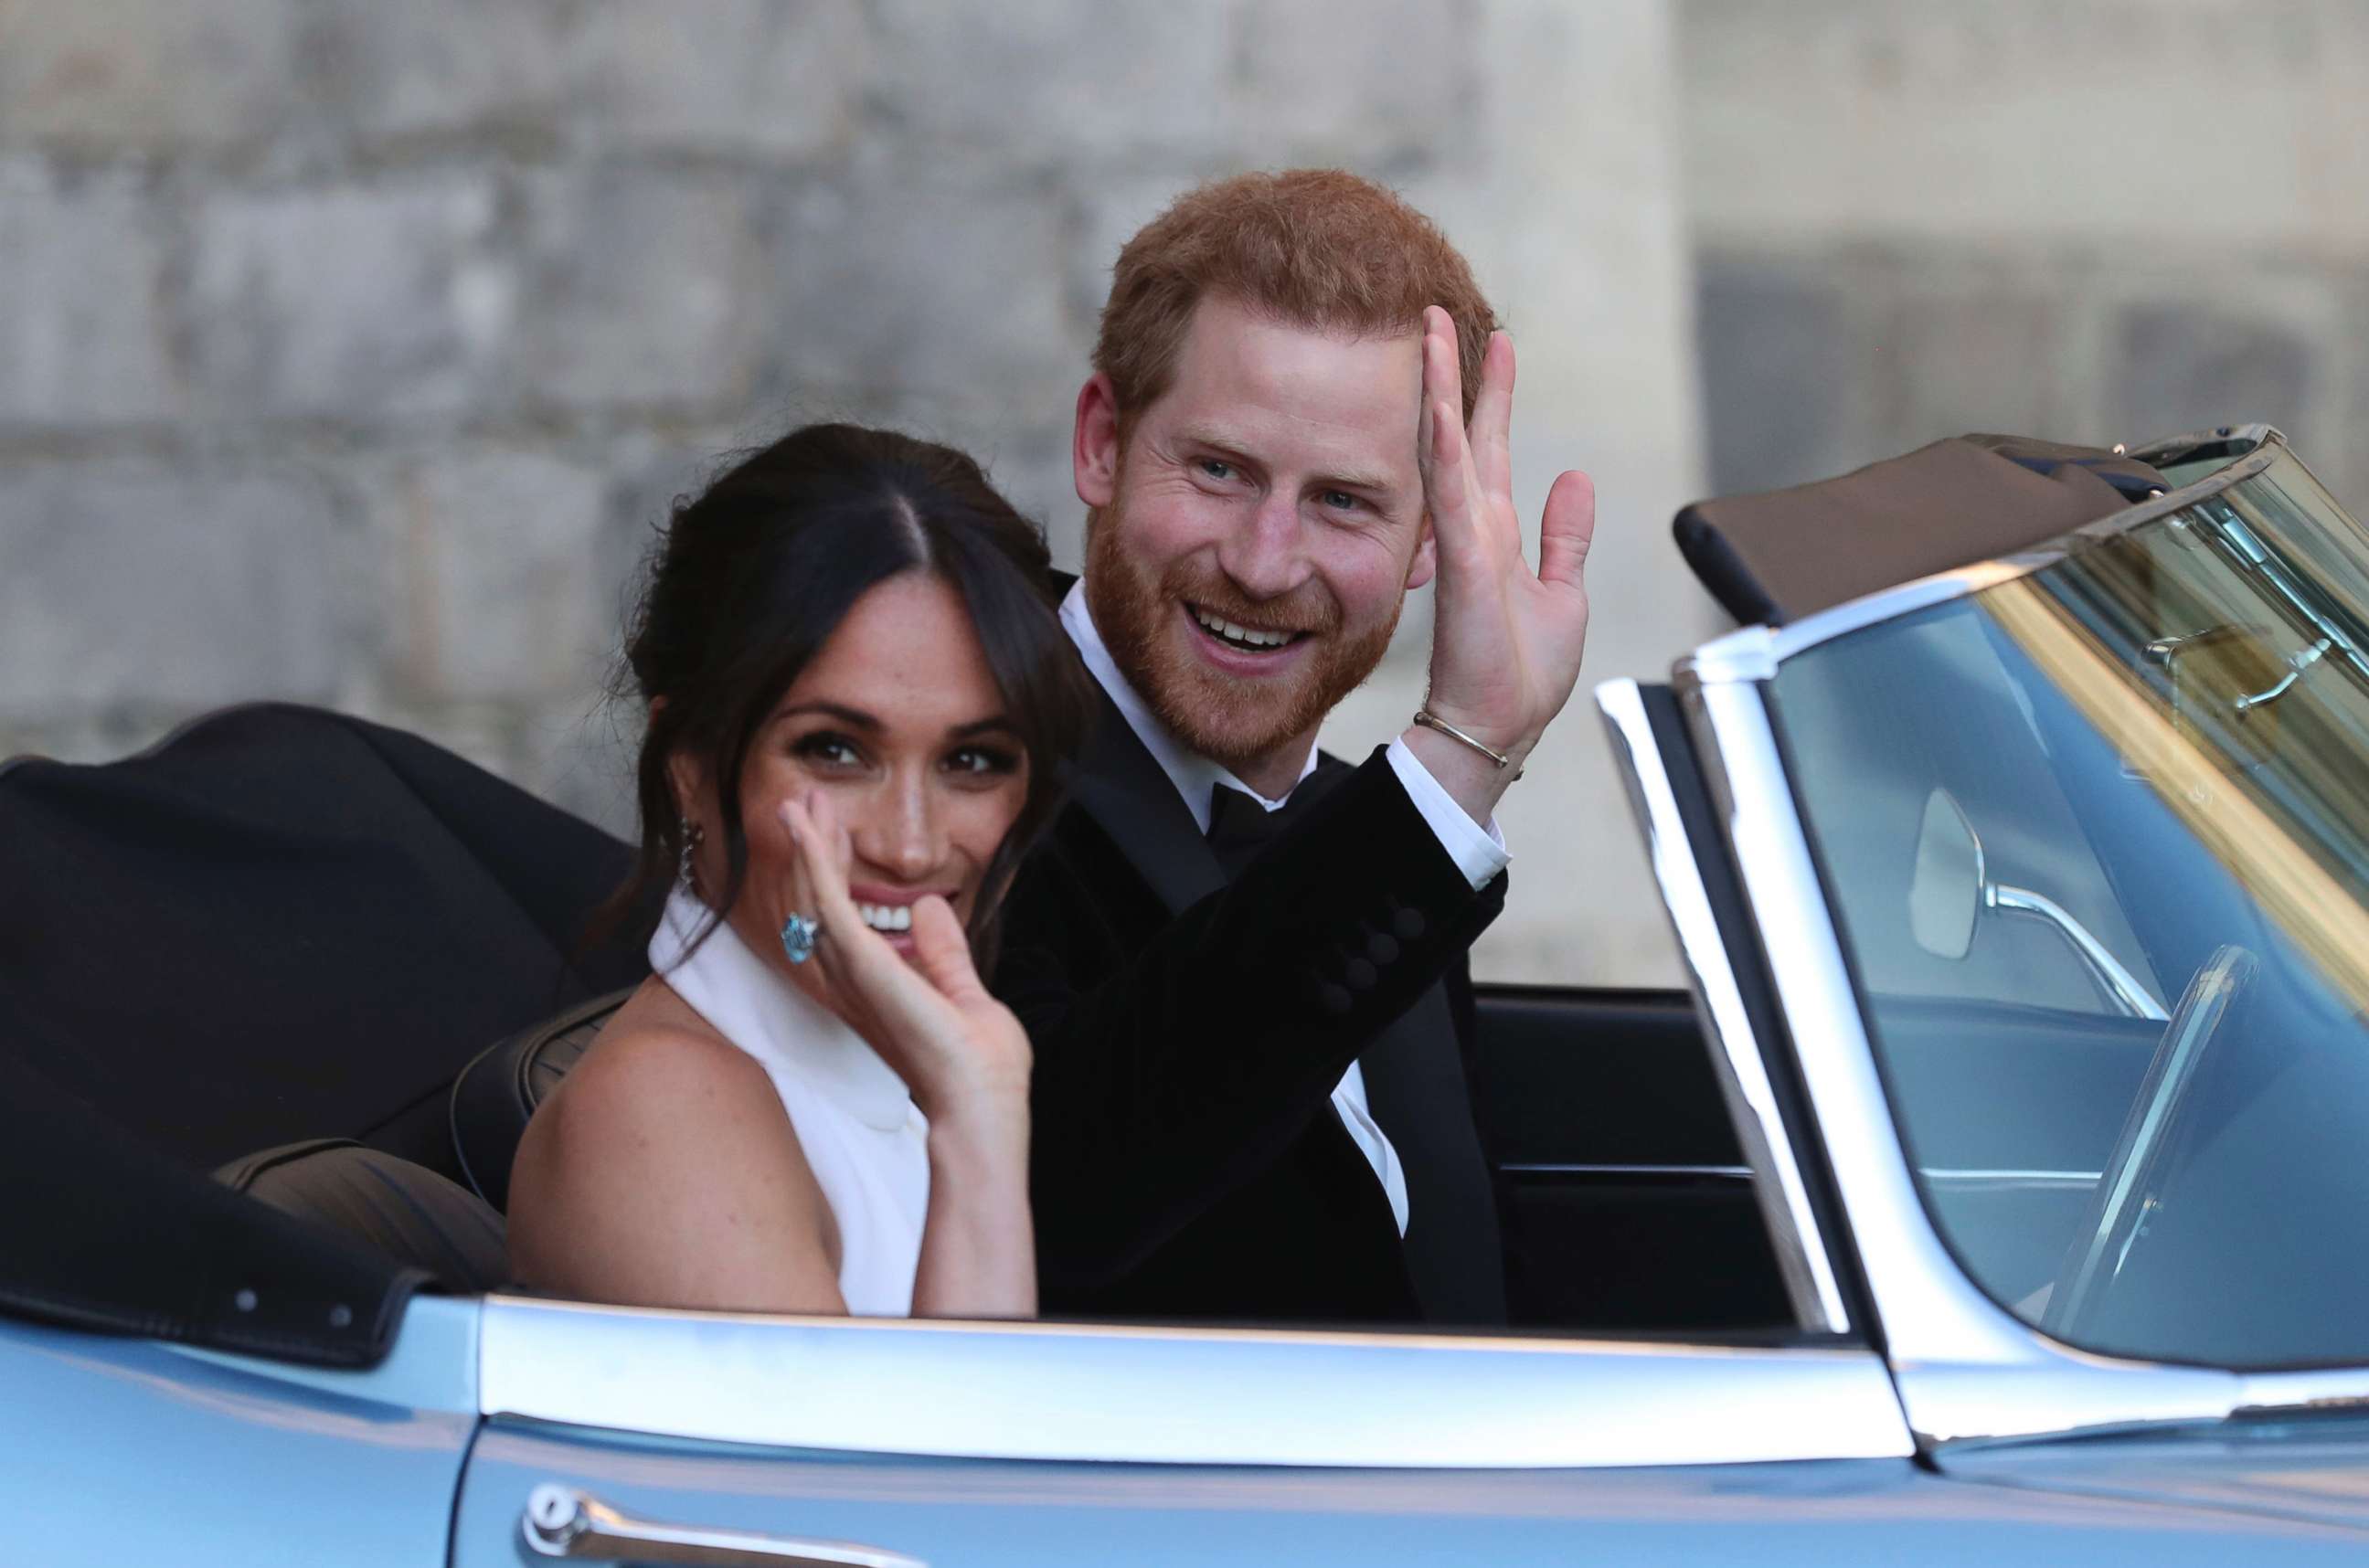 PHOTO: The newly married Duke and Duchess of Sussex, Prince Harry and Meghan Markle, leave Windsor Castle in a convertible car after their wedding in Windsor, England, to attend an evening reception at Frogmore House, May 19, 2018.